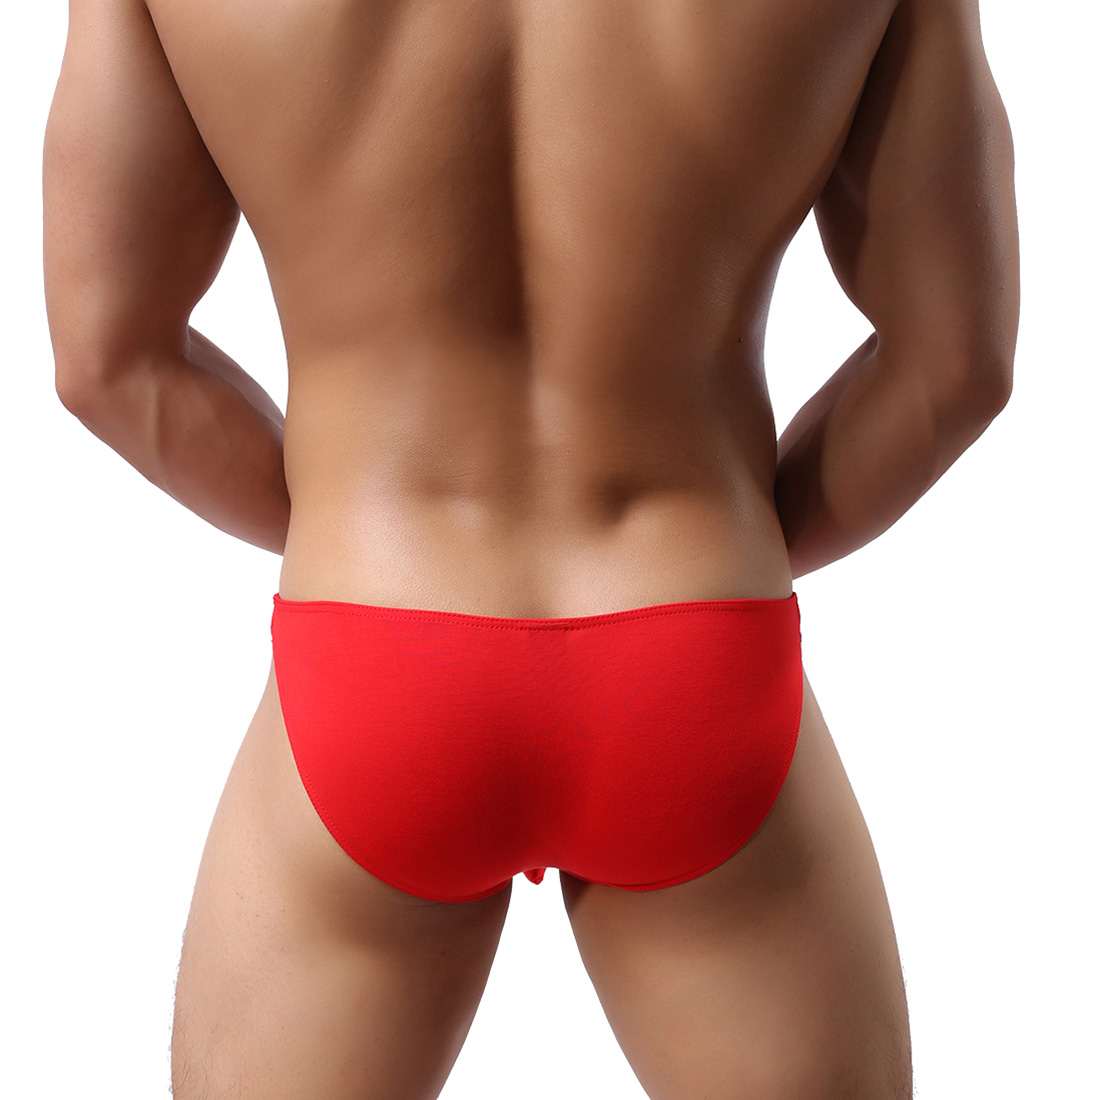 Men's Sexy Lingerie Underwear Modal Triangle Pants Shorts with Penis Sheath WH8 Red XL